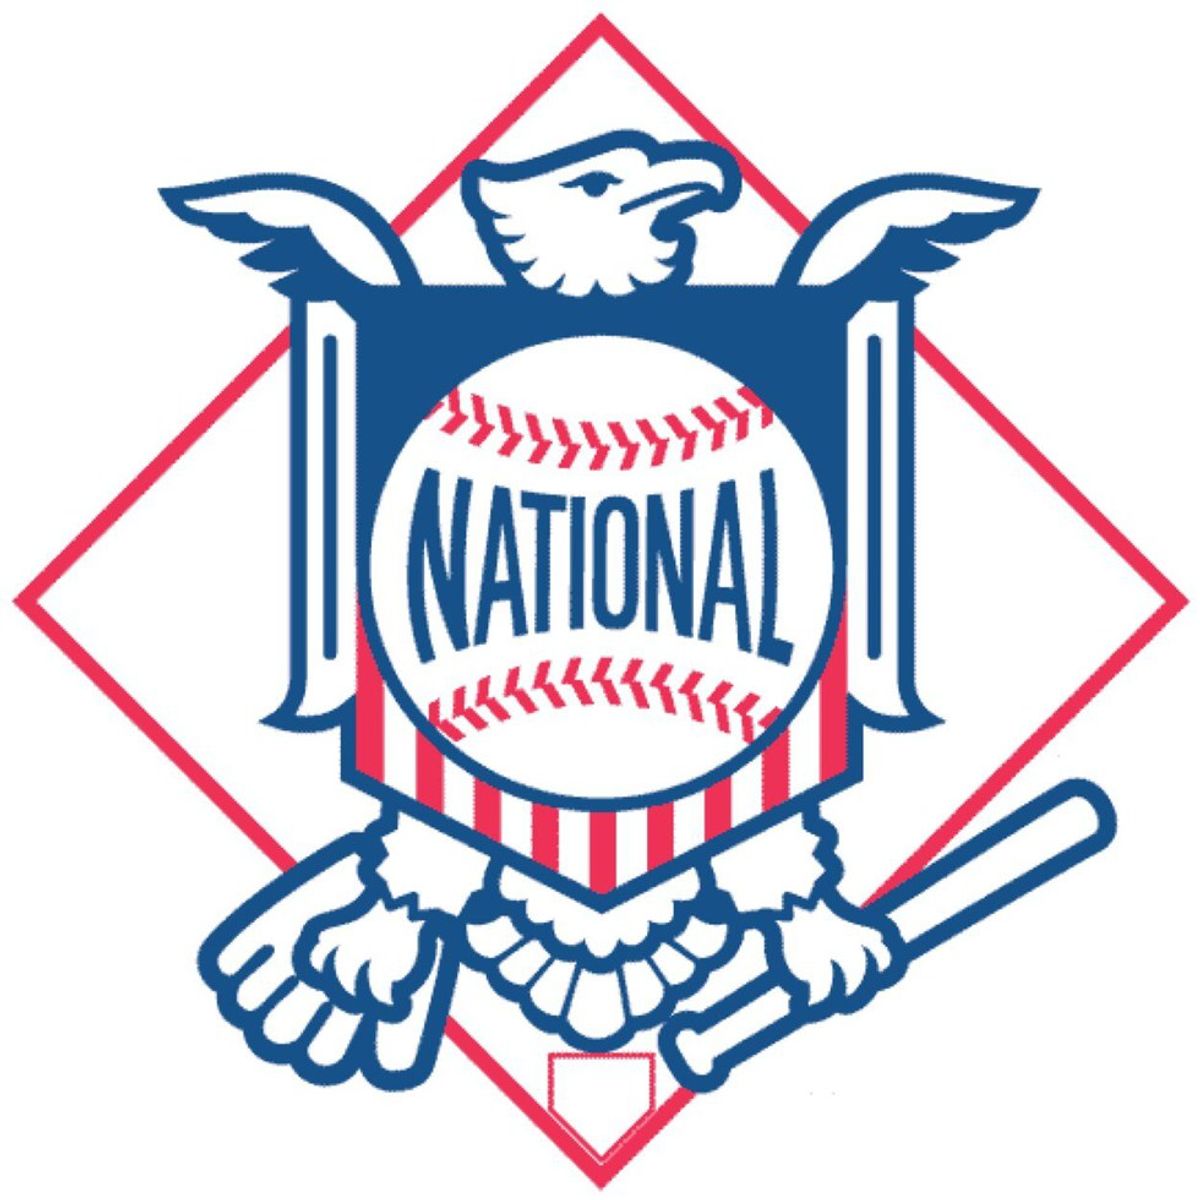 What Every National League Team Needs?